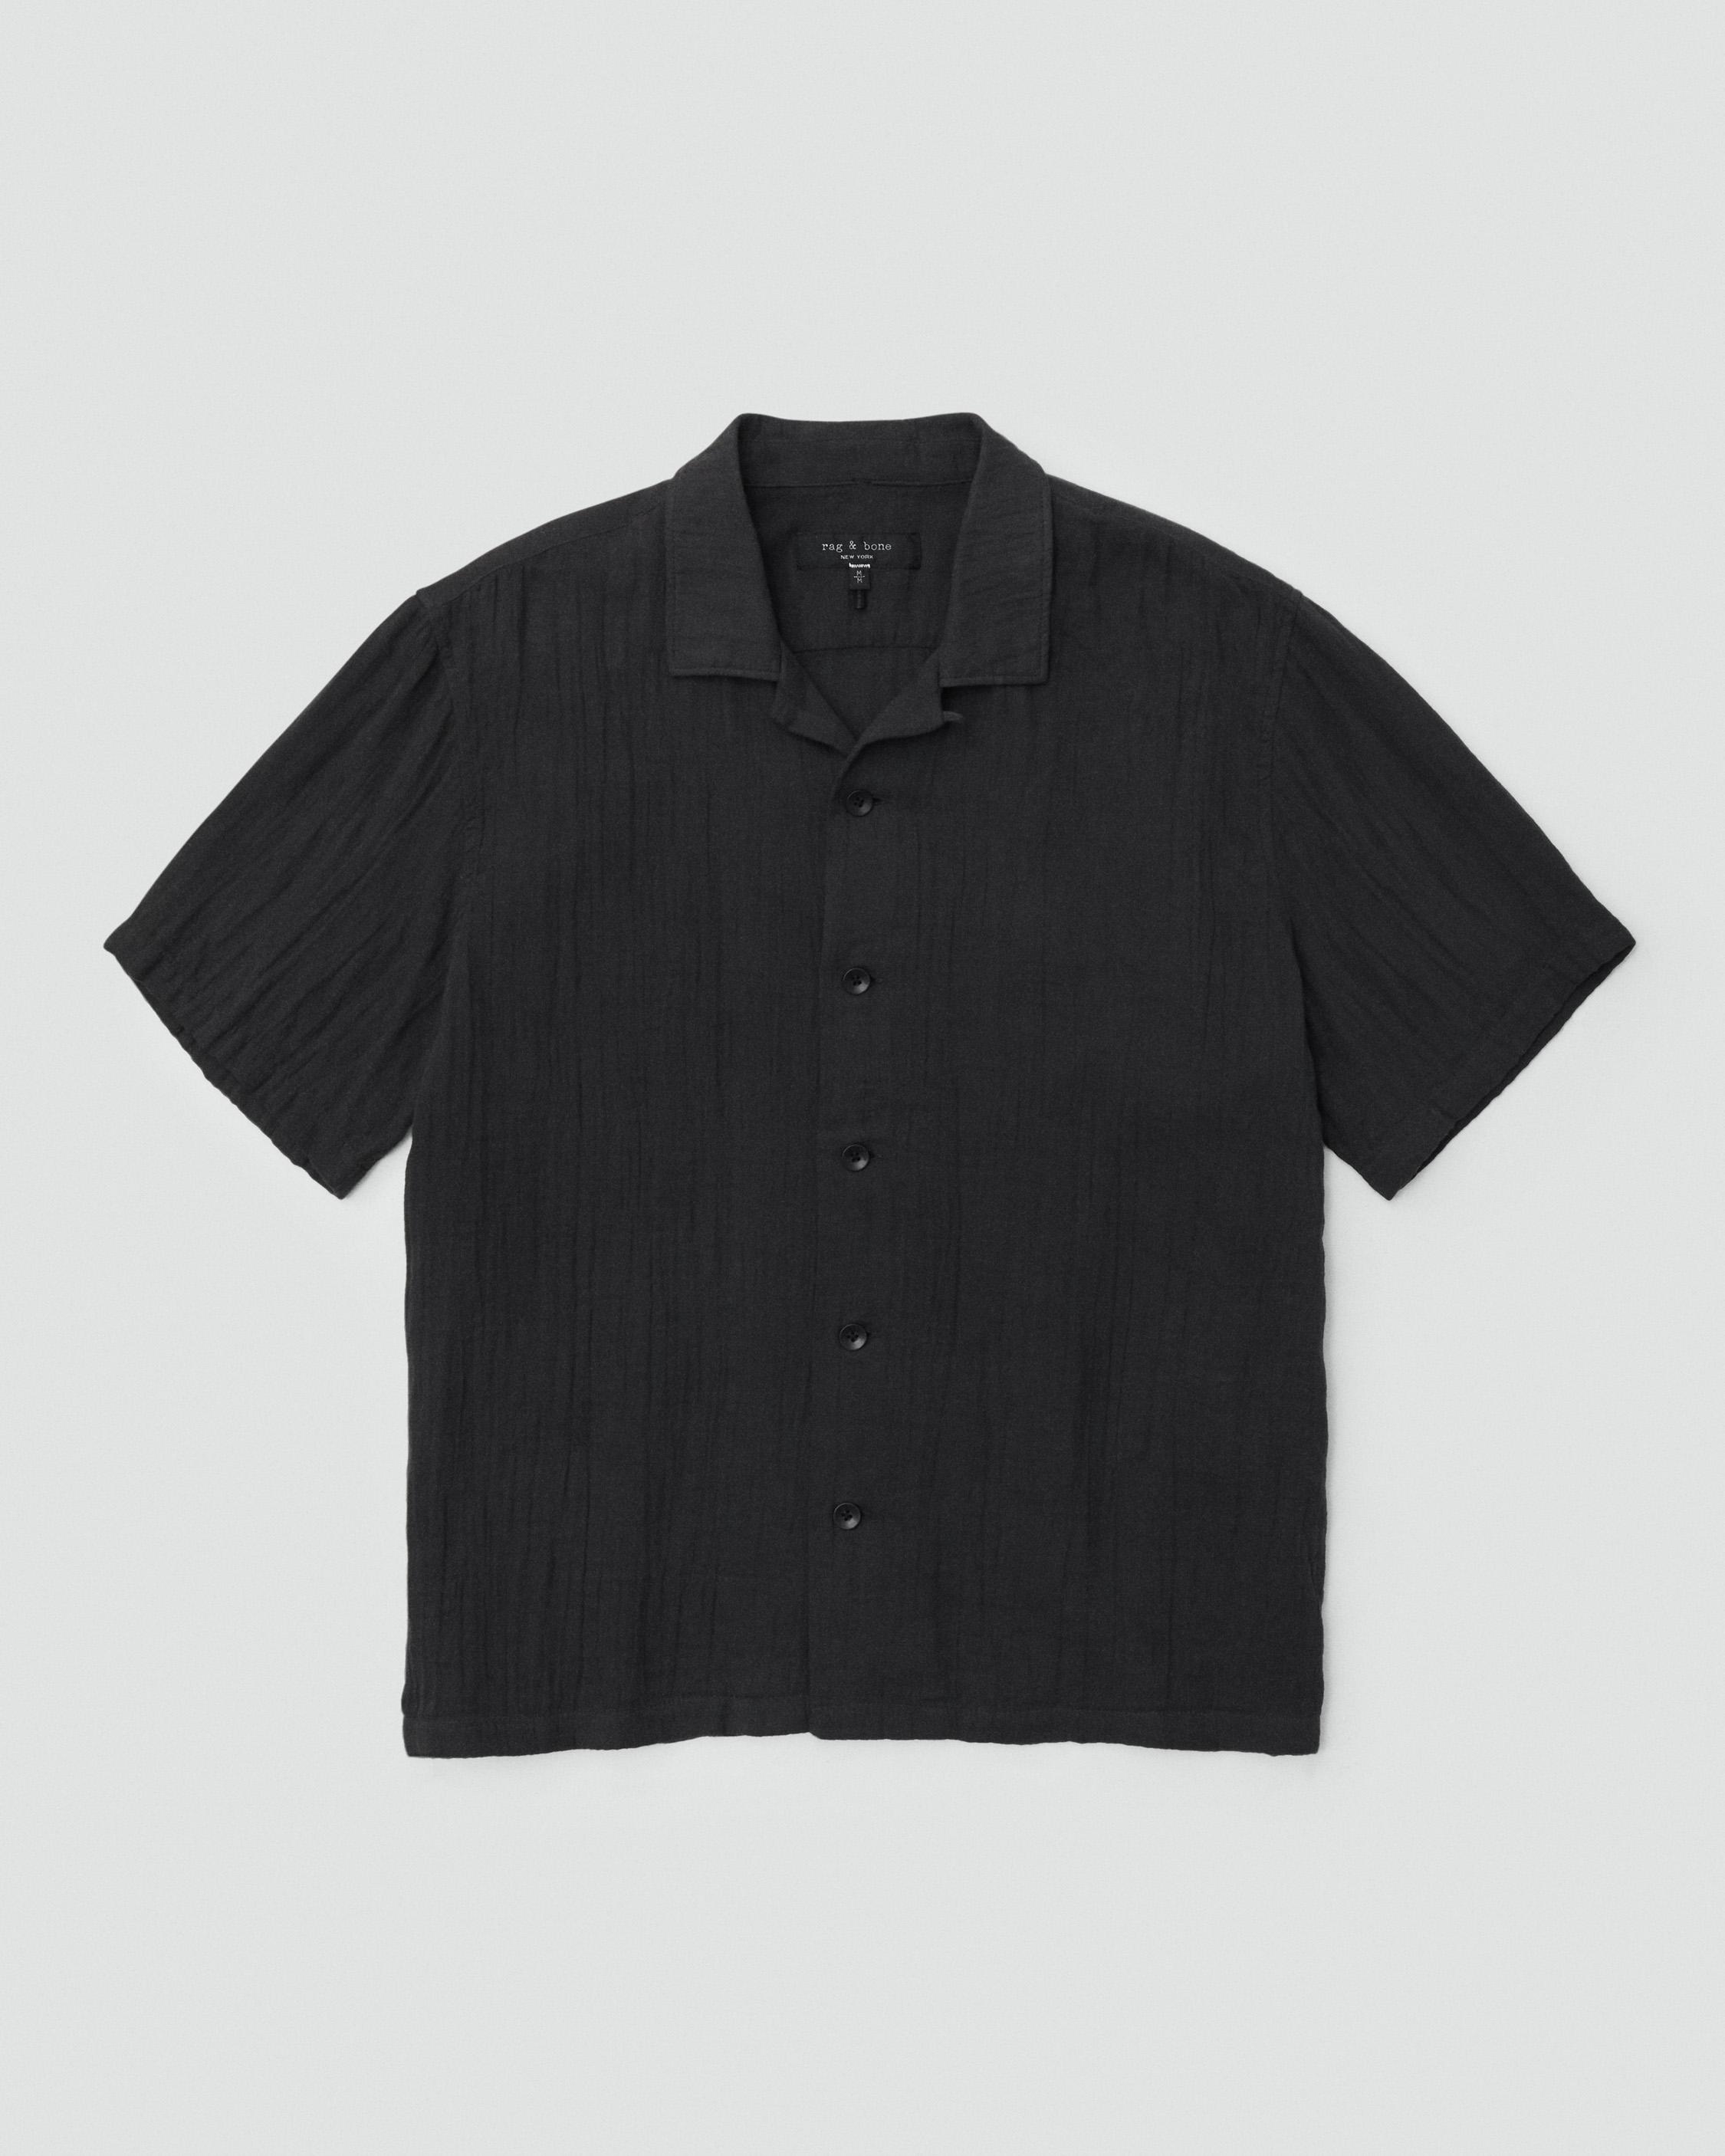 Avery Gauze Camp Shirt
Relaxed Fit - 1